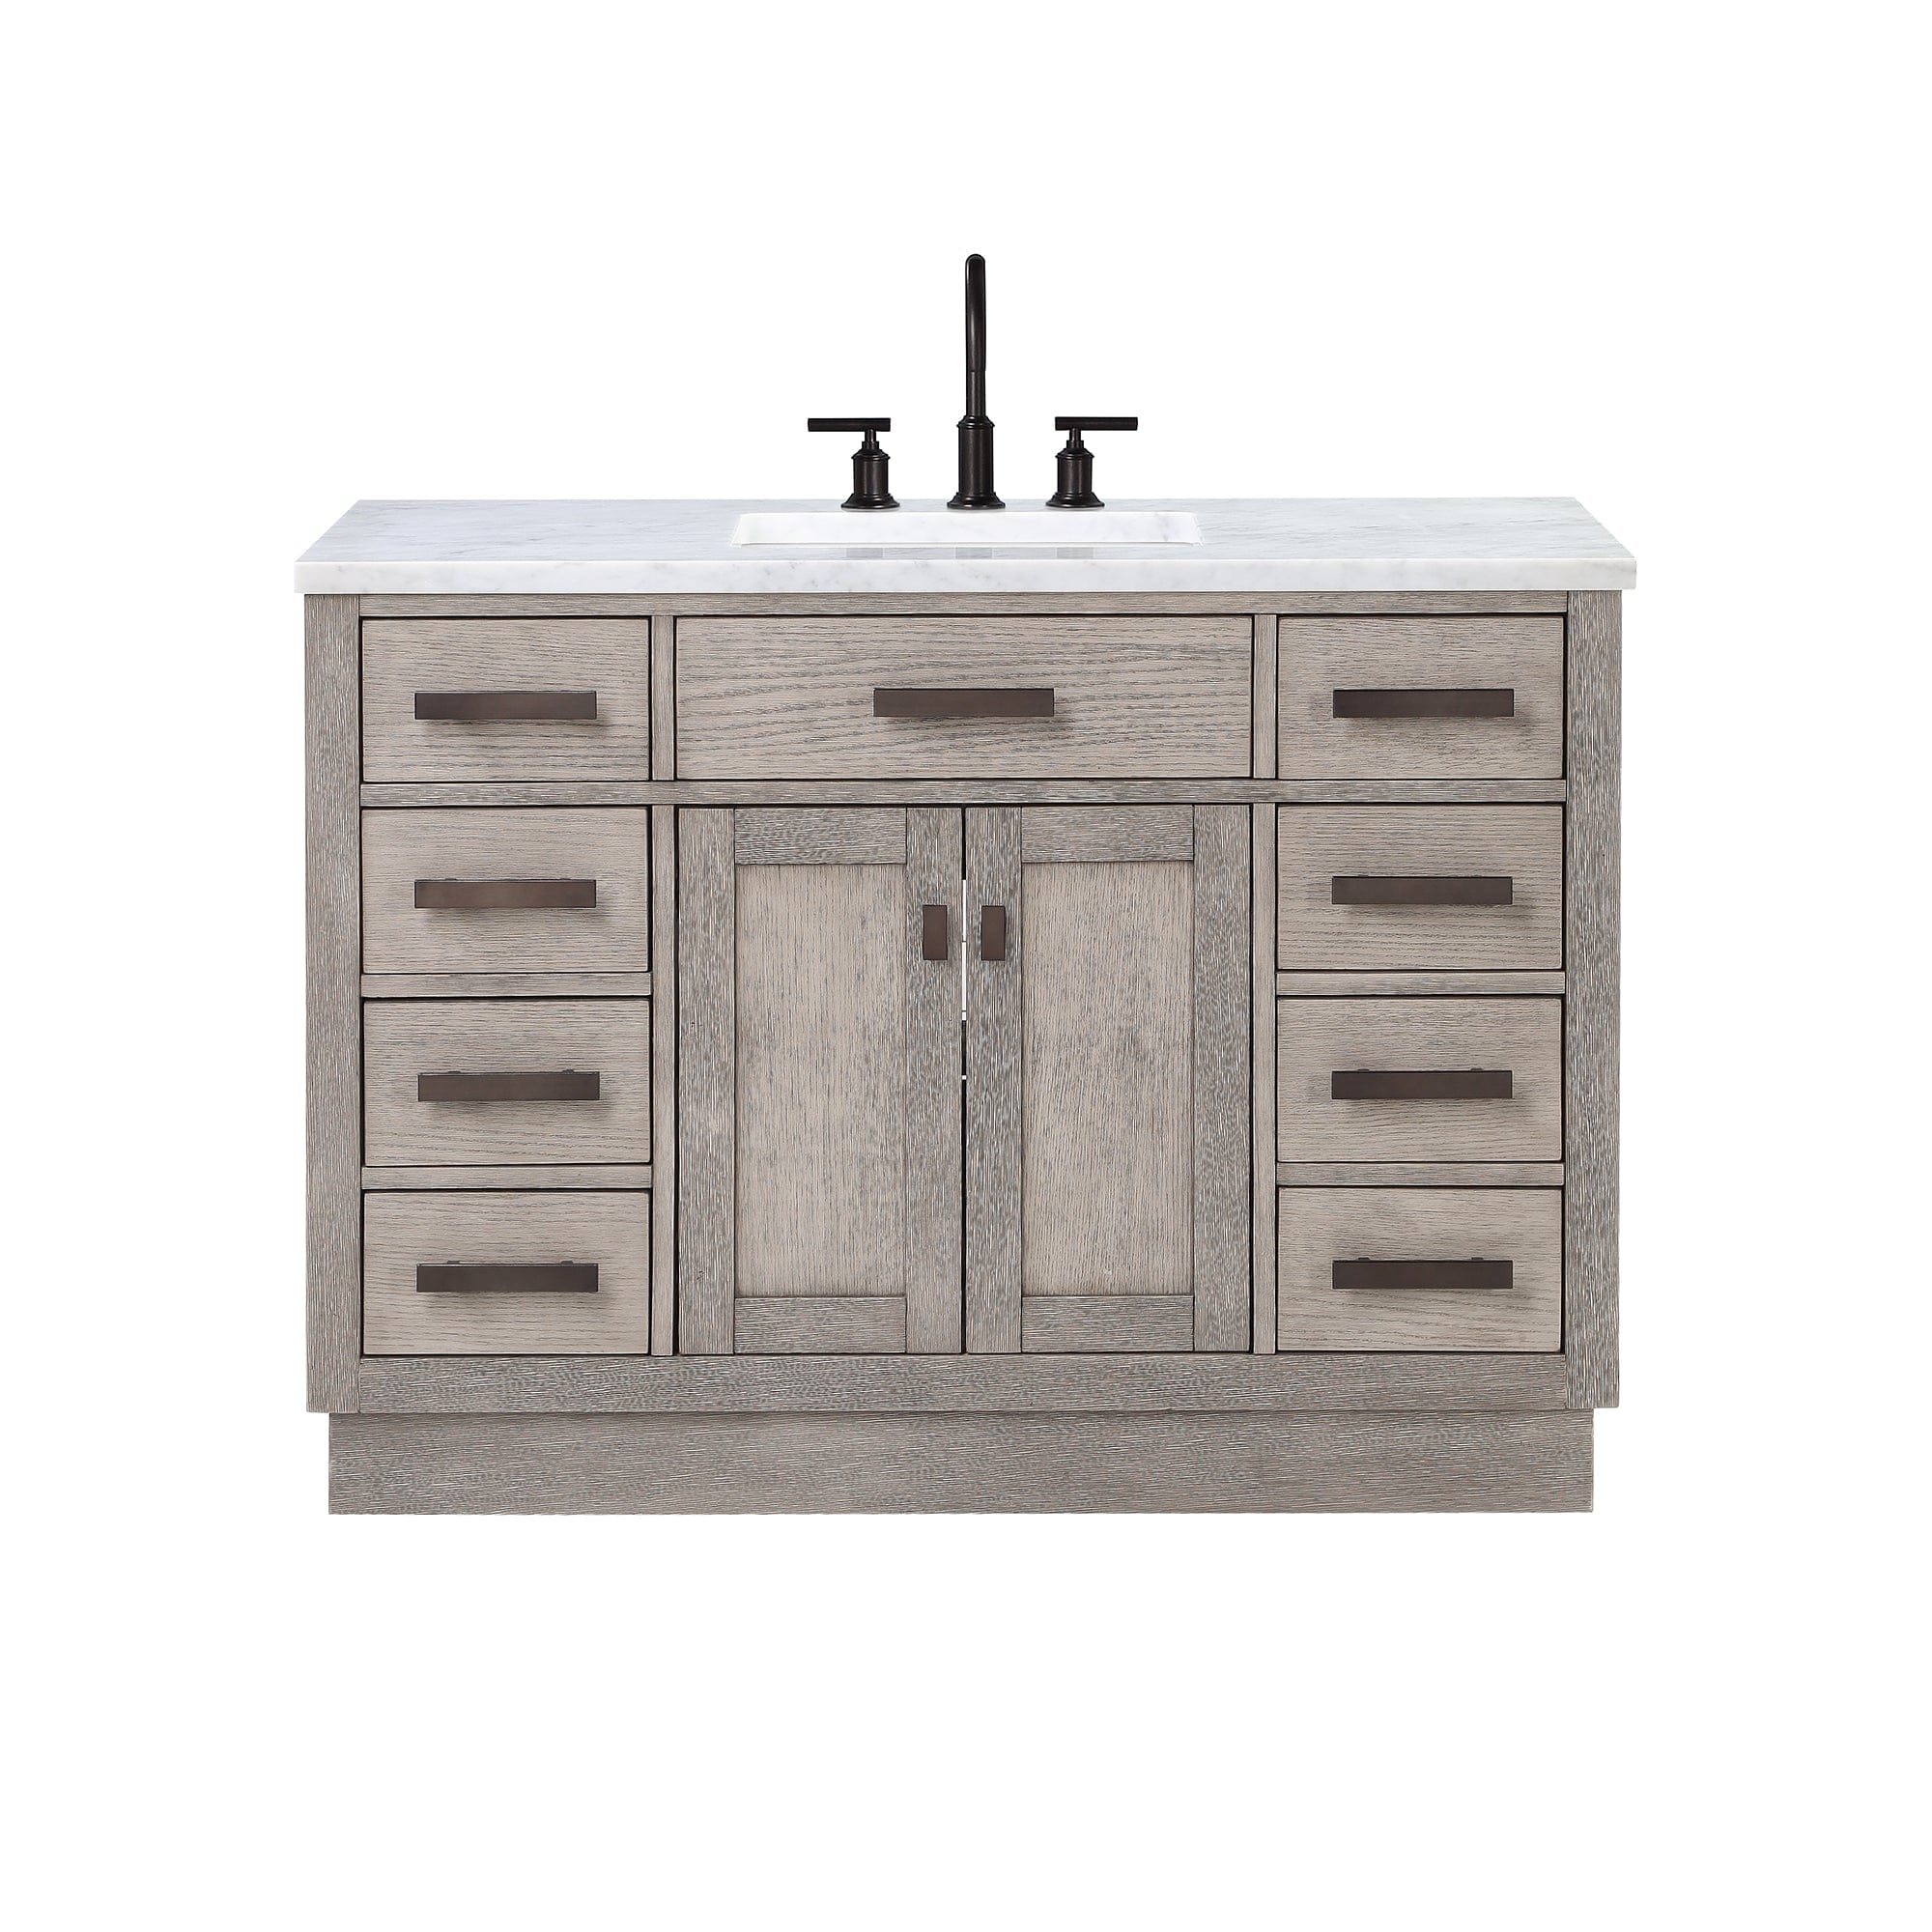 Chestnut 48 In. Single Sink Carrara White Marble Countertop Vanity In Grey Oak with Grooseneck Faucet - Molaix732030764736CH48CW03GK-000BL1403